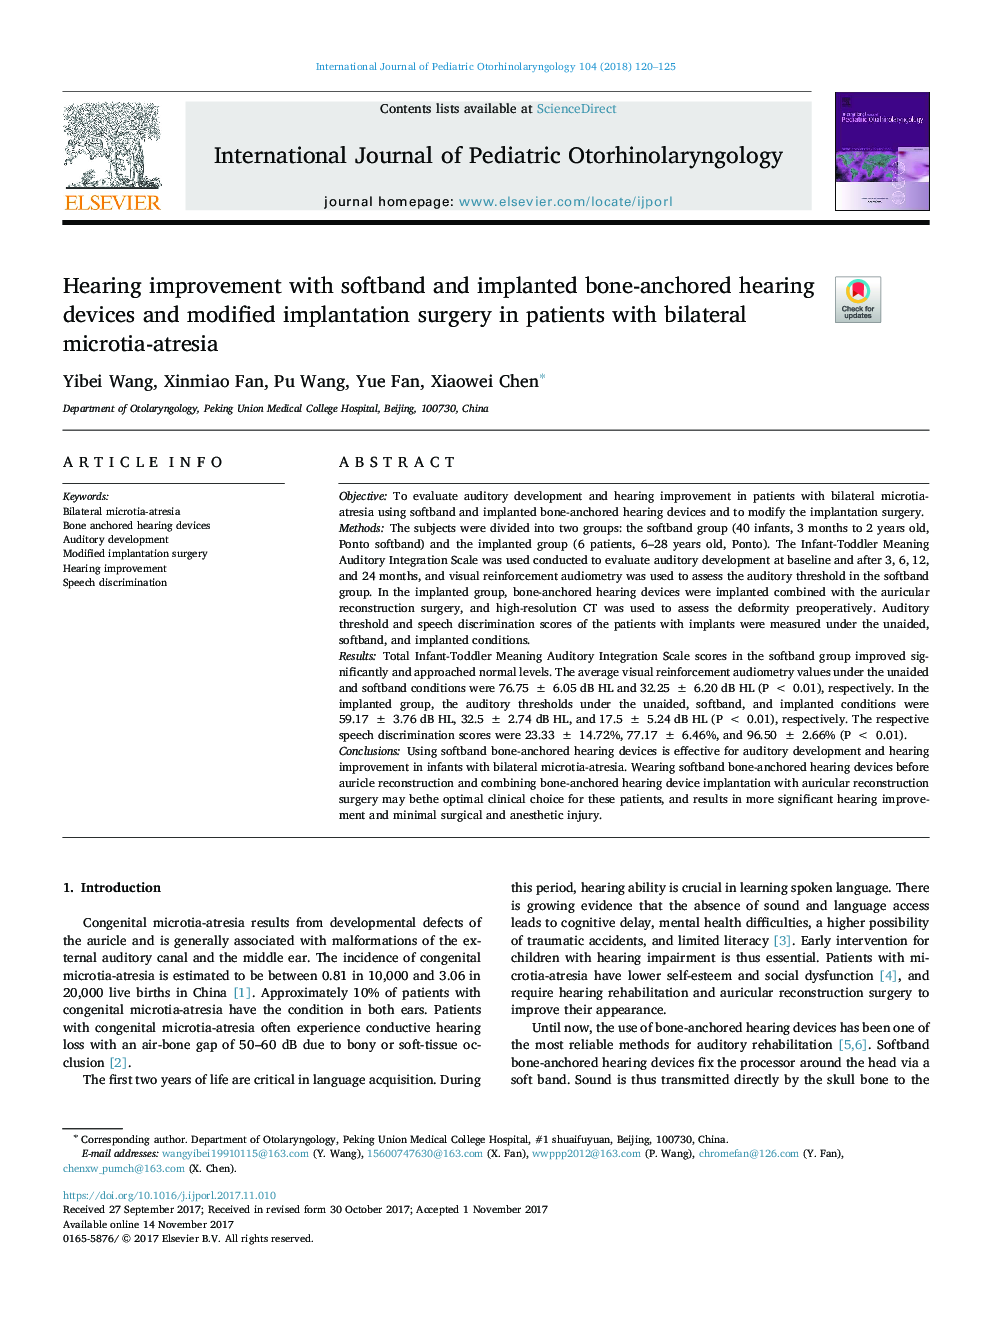 Hearing improvement with softband and implanted bone-anchored hearing devices and modified implantation surgery in patients with bilateral microtia-atresia